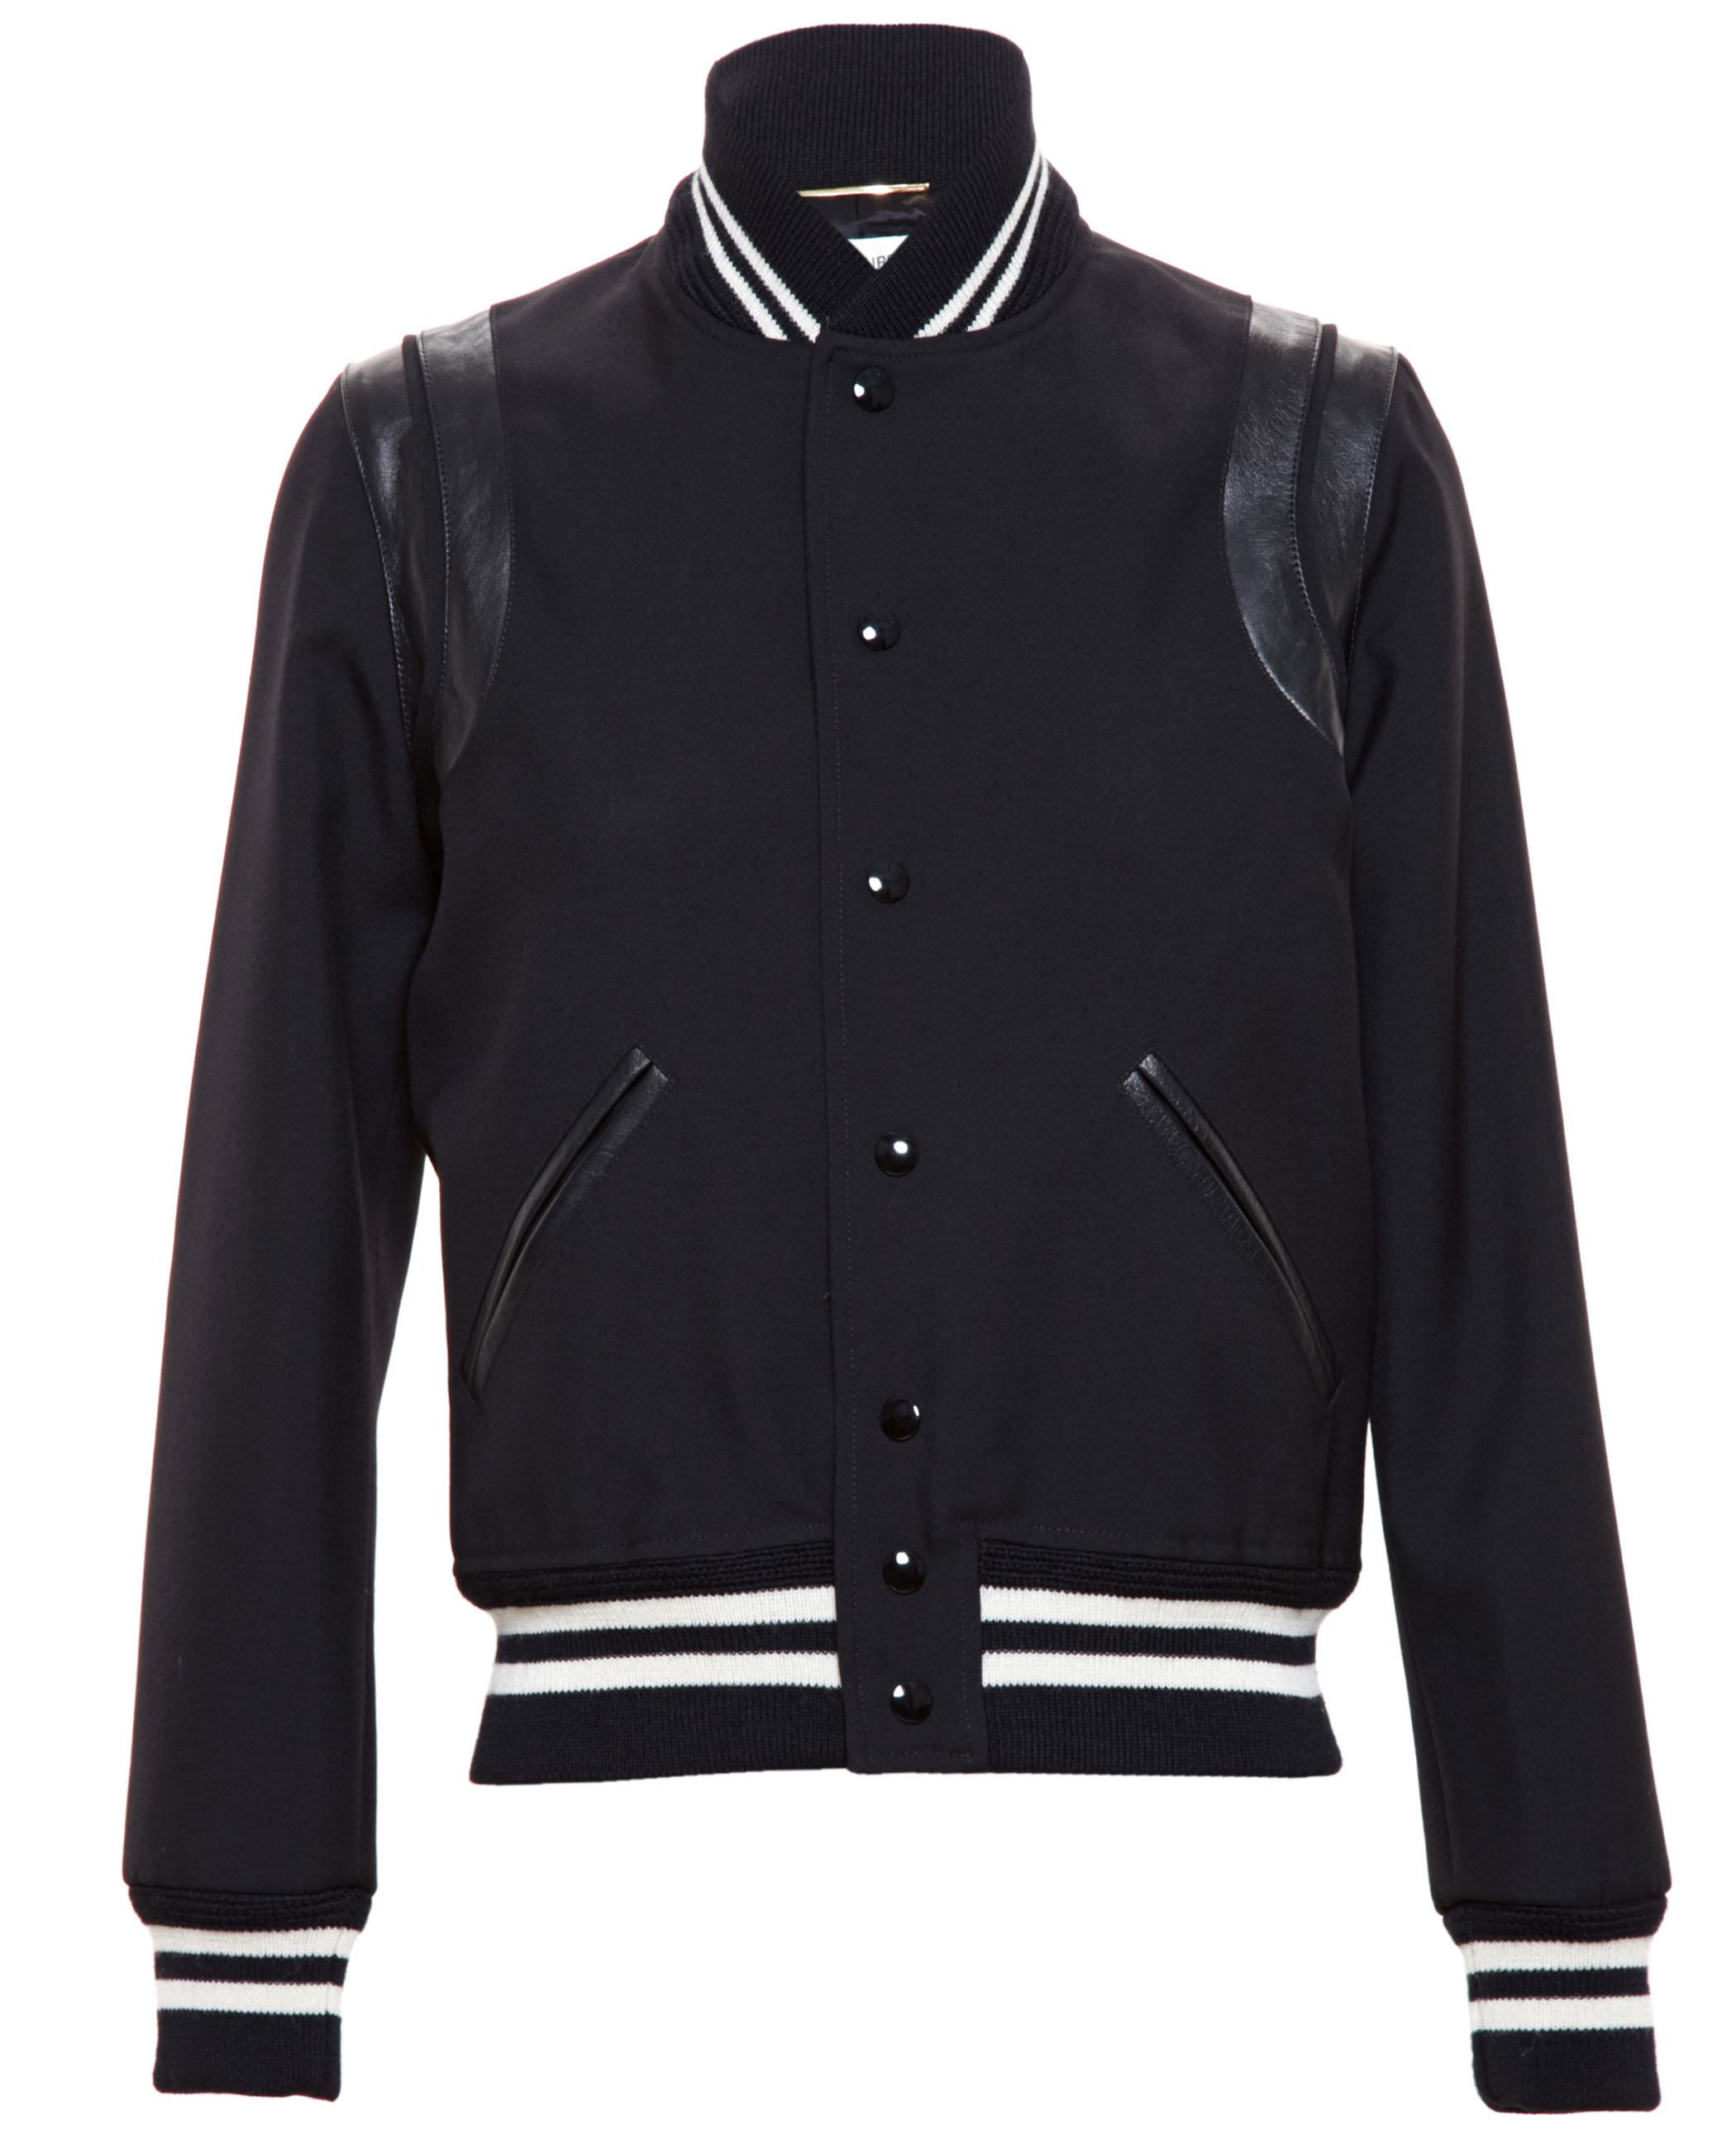 Saint laurent Teddy Jacket With Leather Trim in Black | Lyst